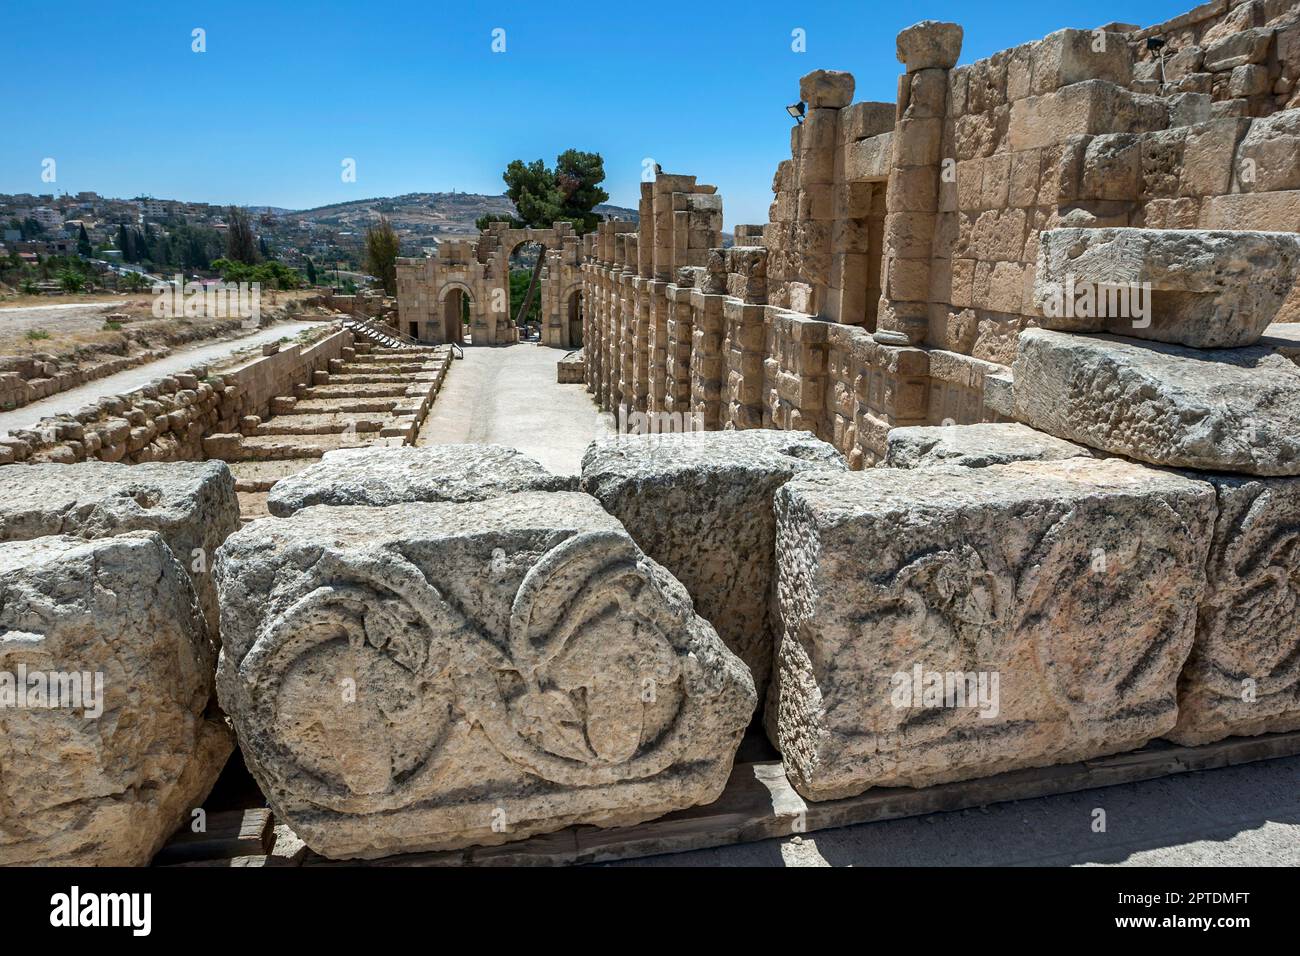 A view looking over the East Souq towards the South Gate at the ancient site of Jerash in Jordan. Stock Photo